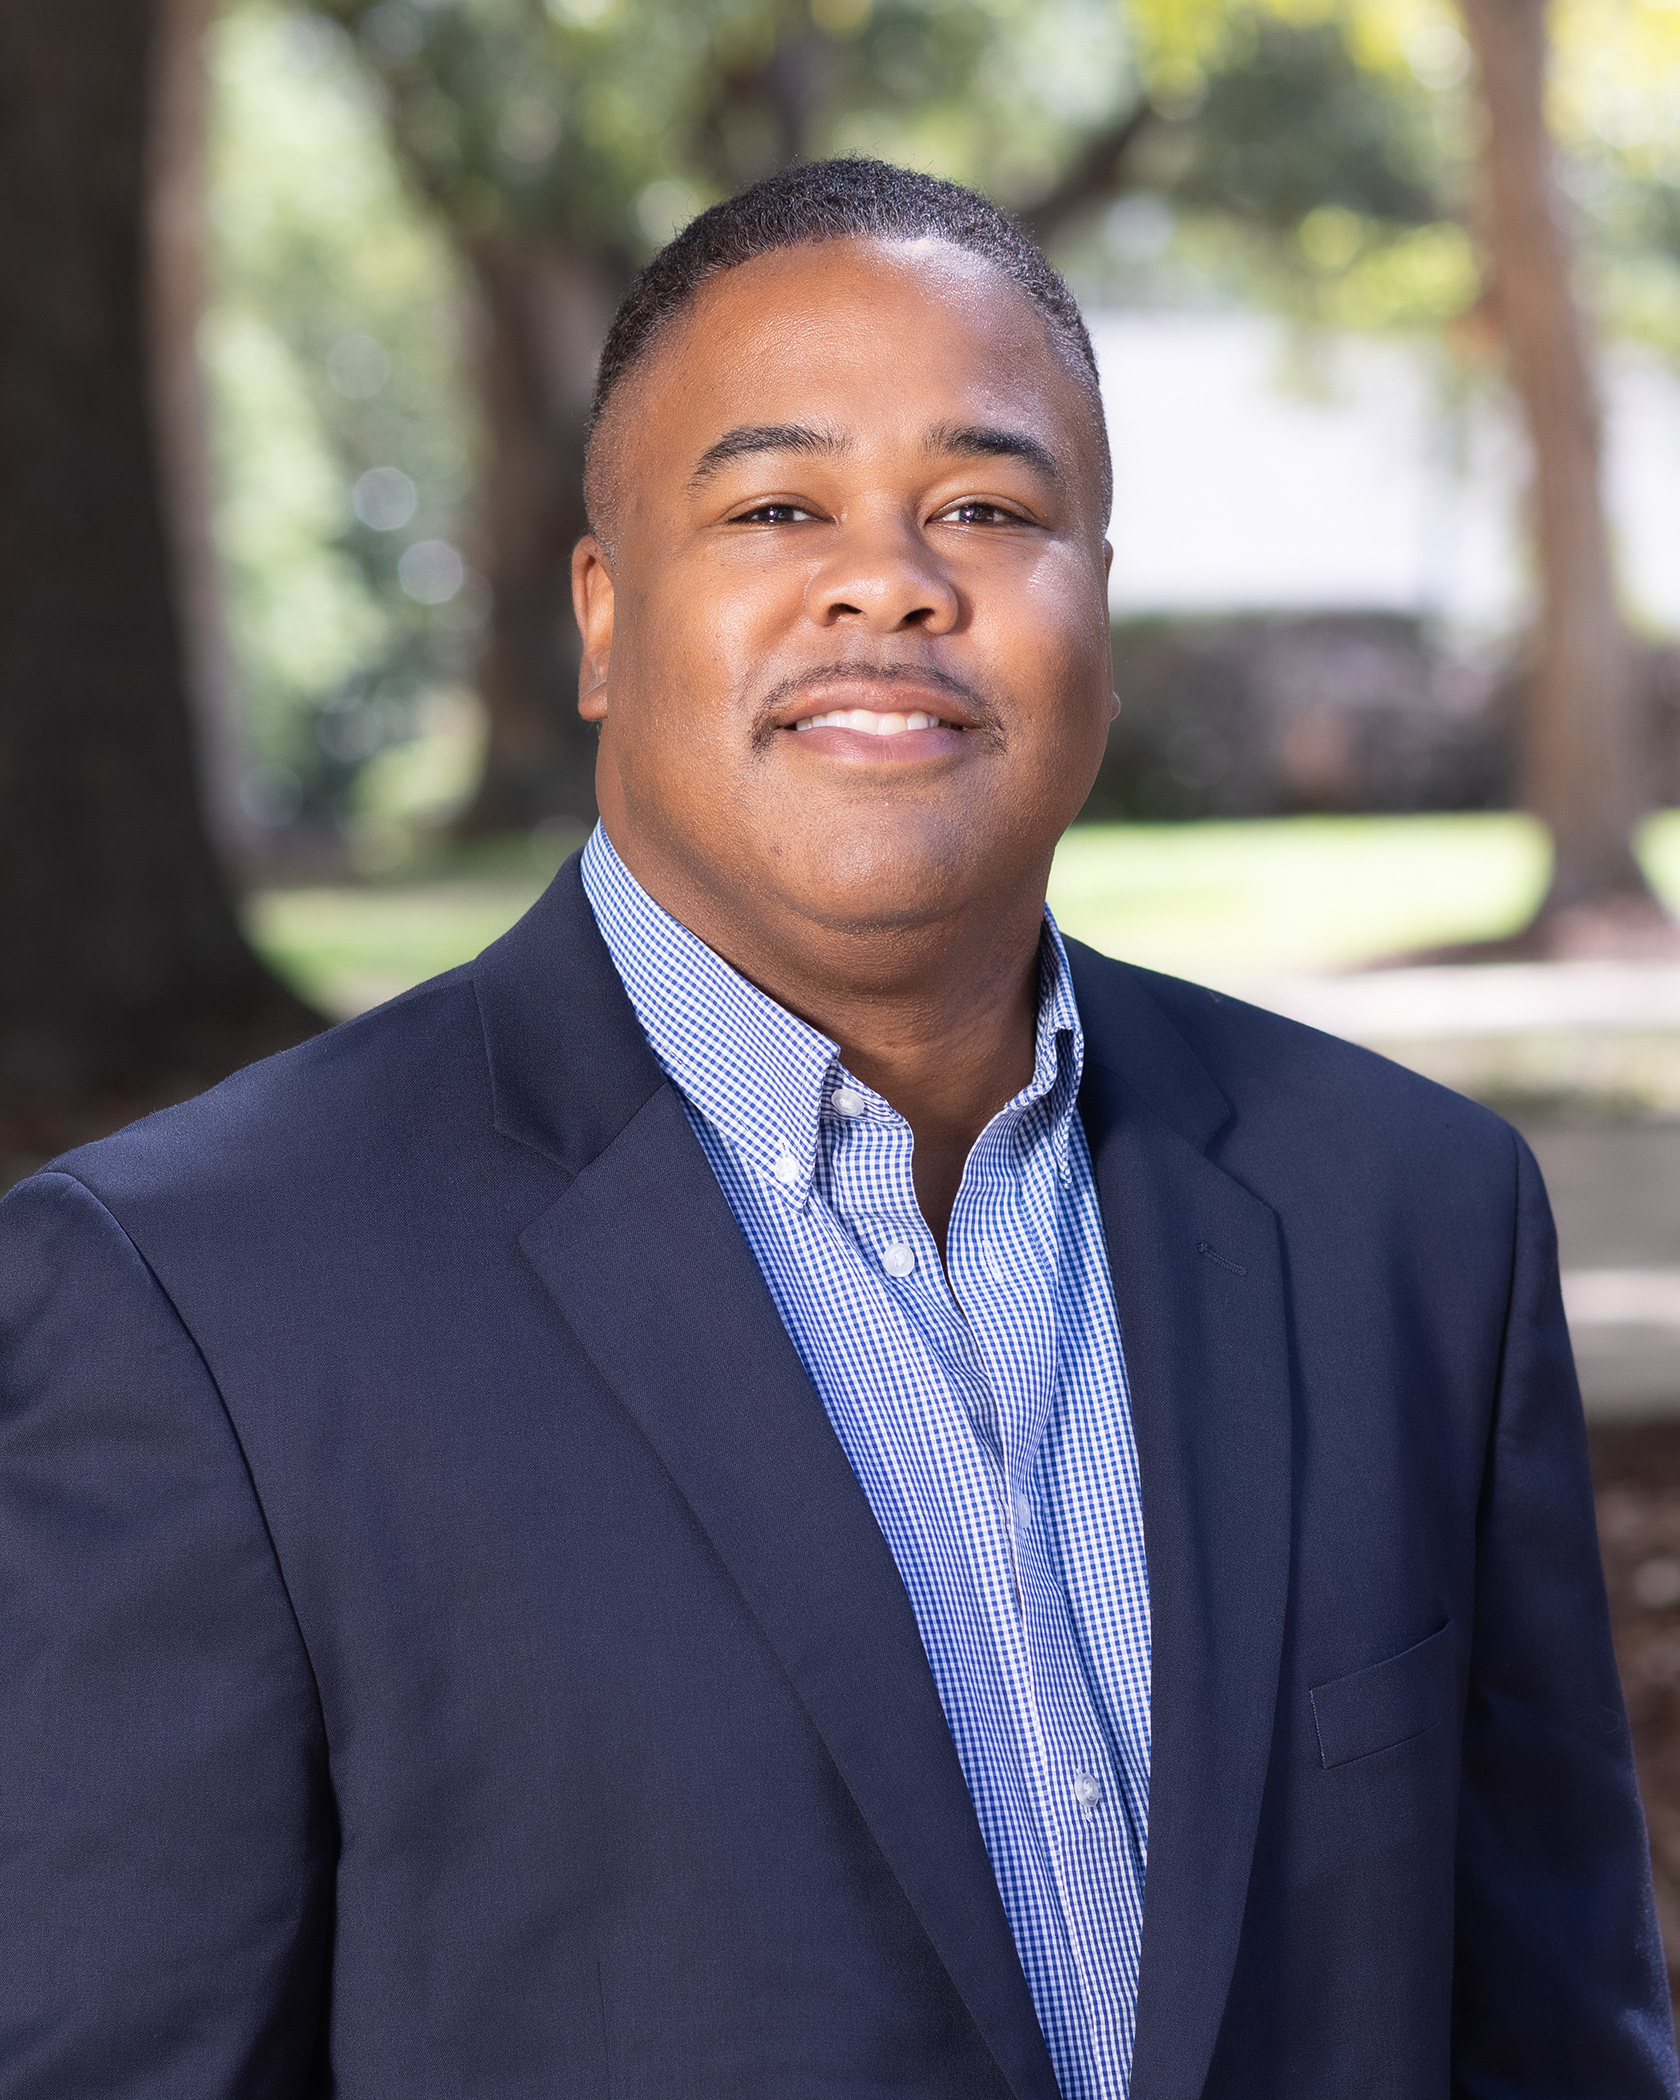 Ryan Upshaw is assistant dean for student life at Millsaps College.